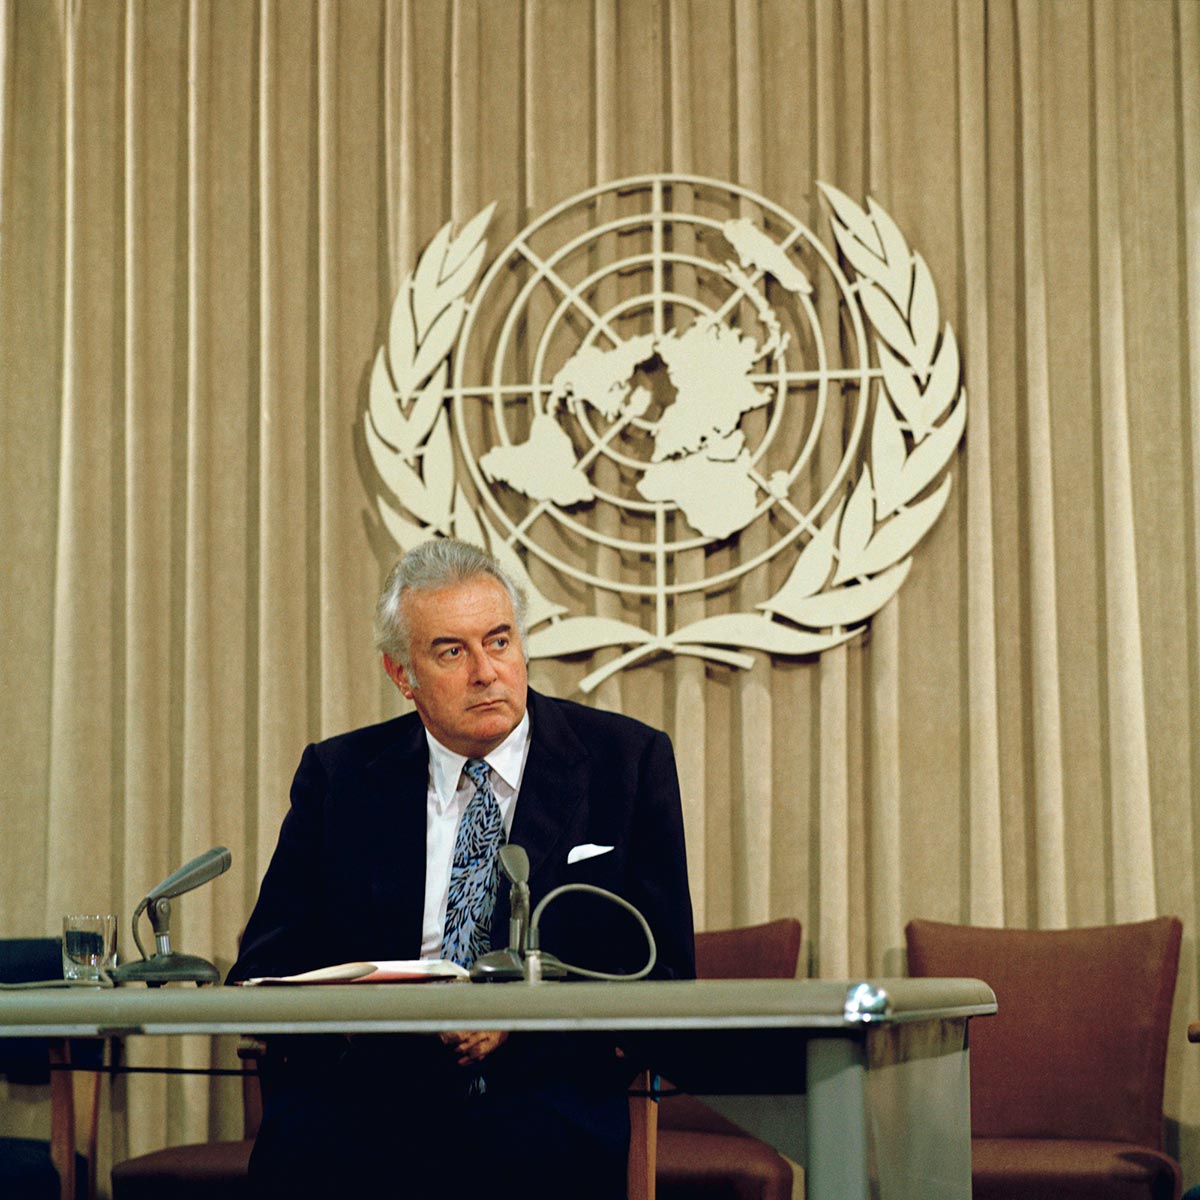 Gough Whitlam speaks at the United Nations in November 1974. - click to view larger image